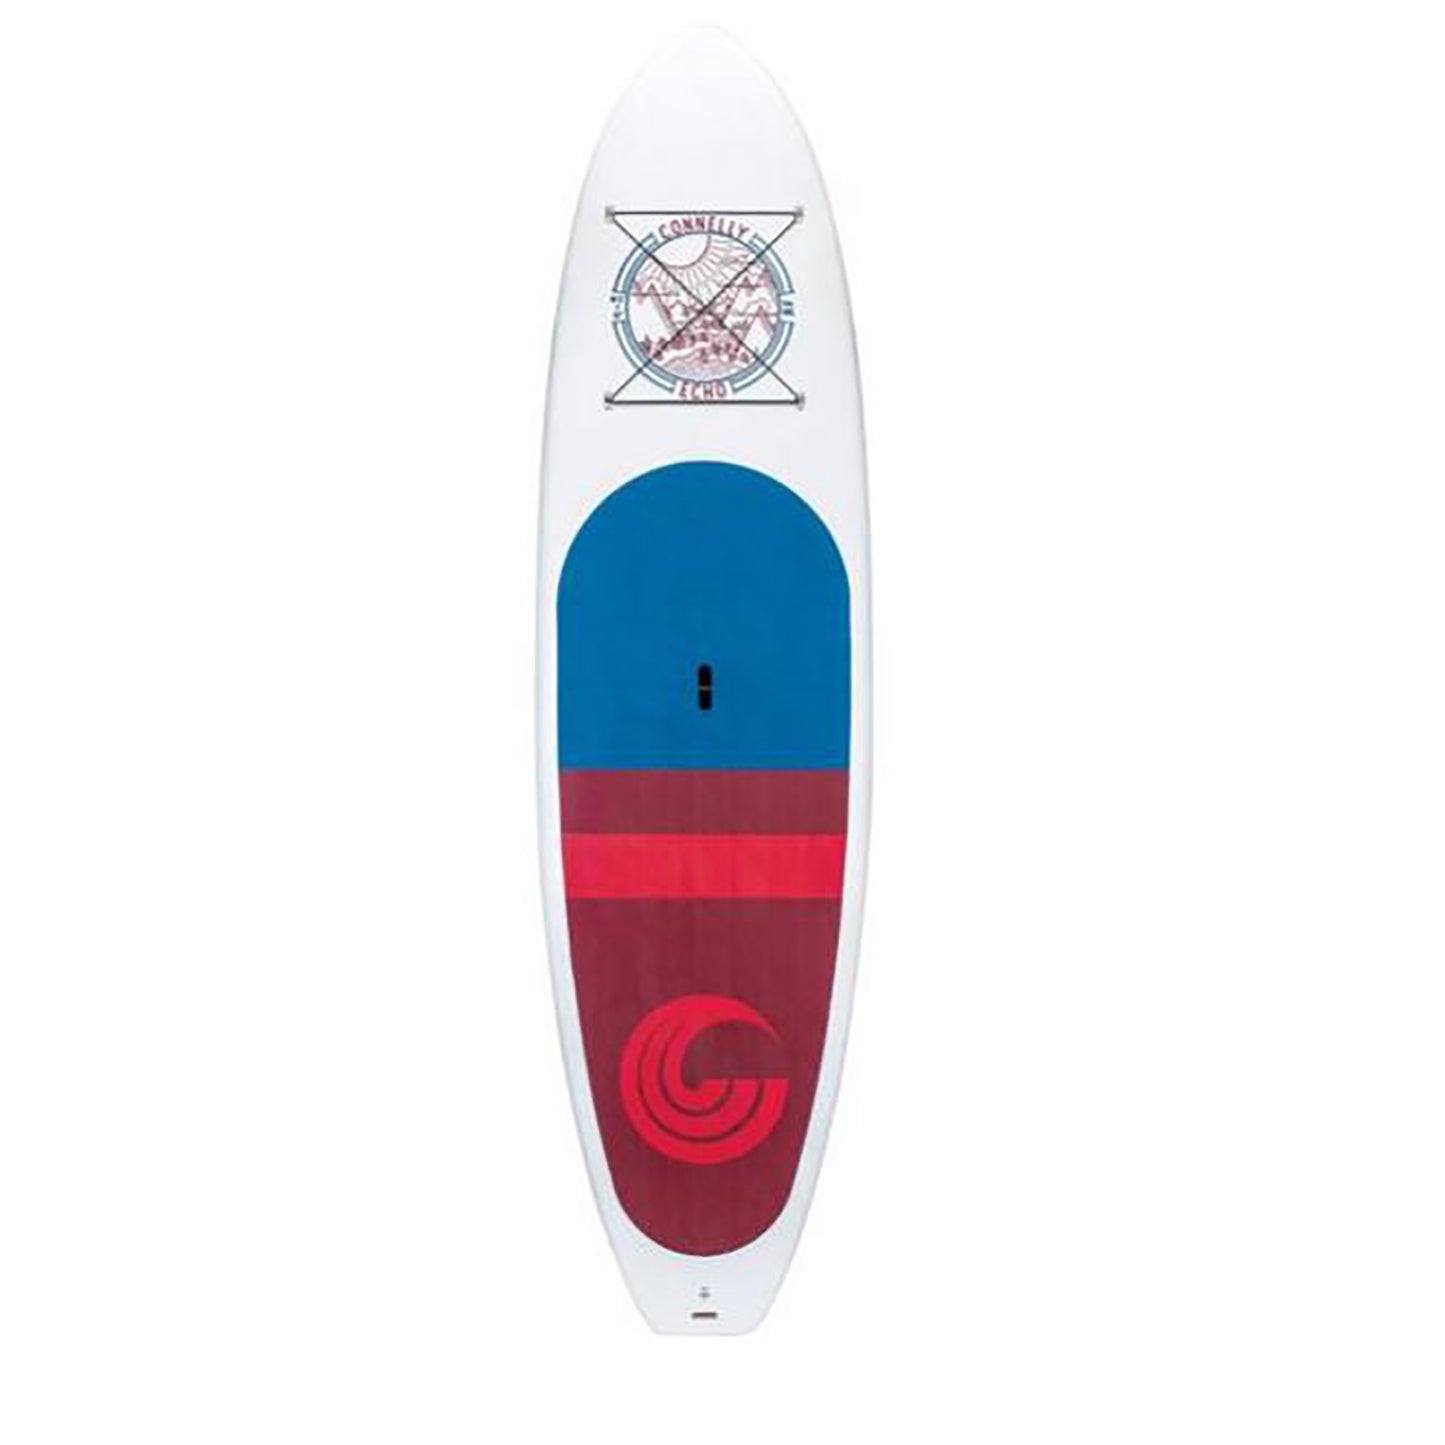 Connelly 10'6" Echo SUP w/Paddle 2021 Model